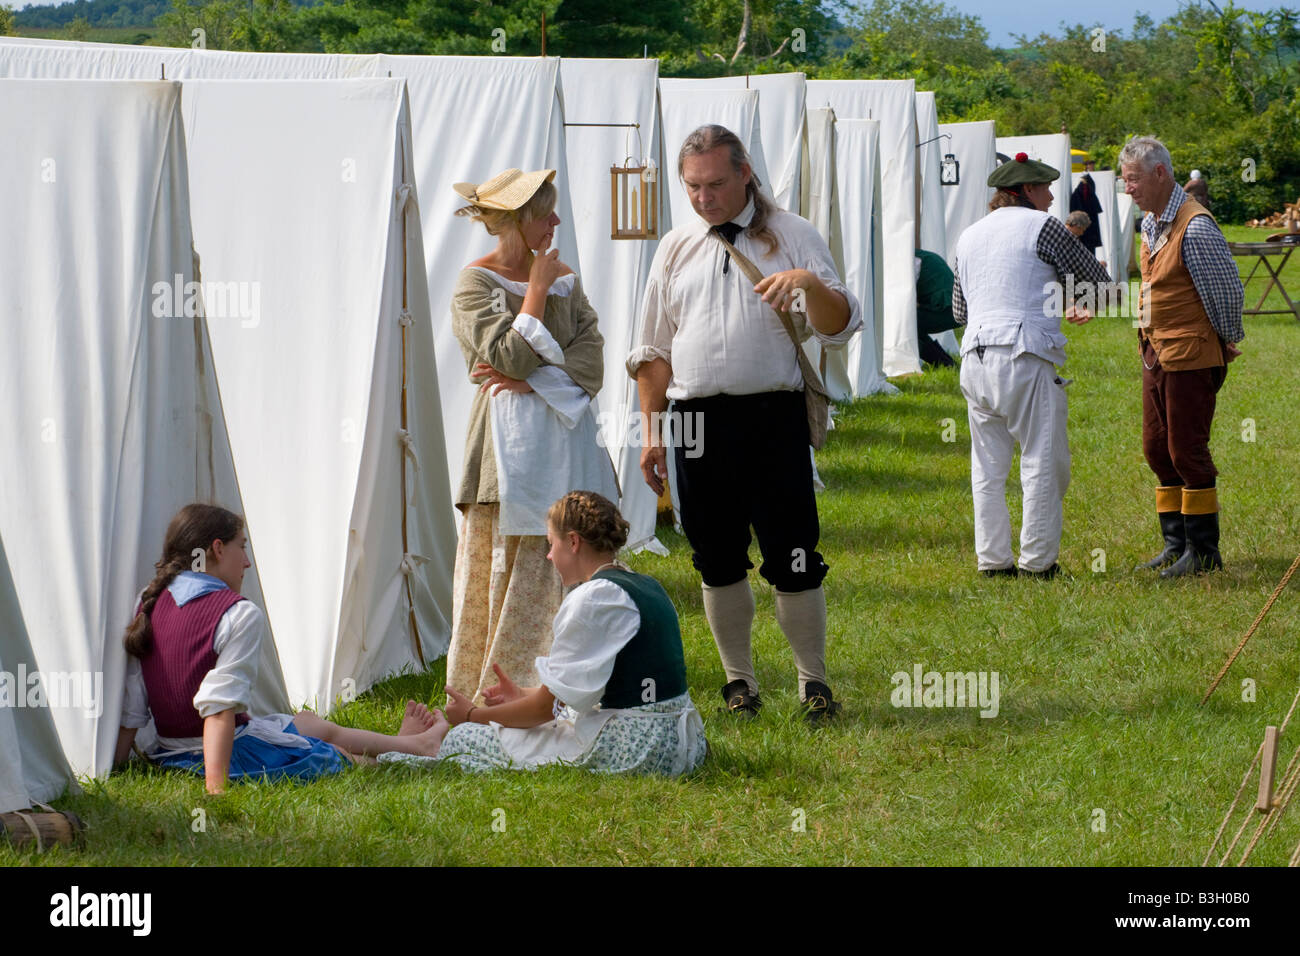 Reenactors relax by encampment tents at Revolutionary War reenactment Mohawk Valley New York State Stock Photo